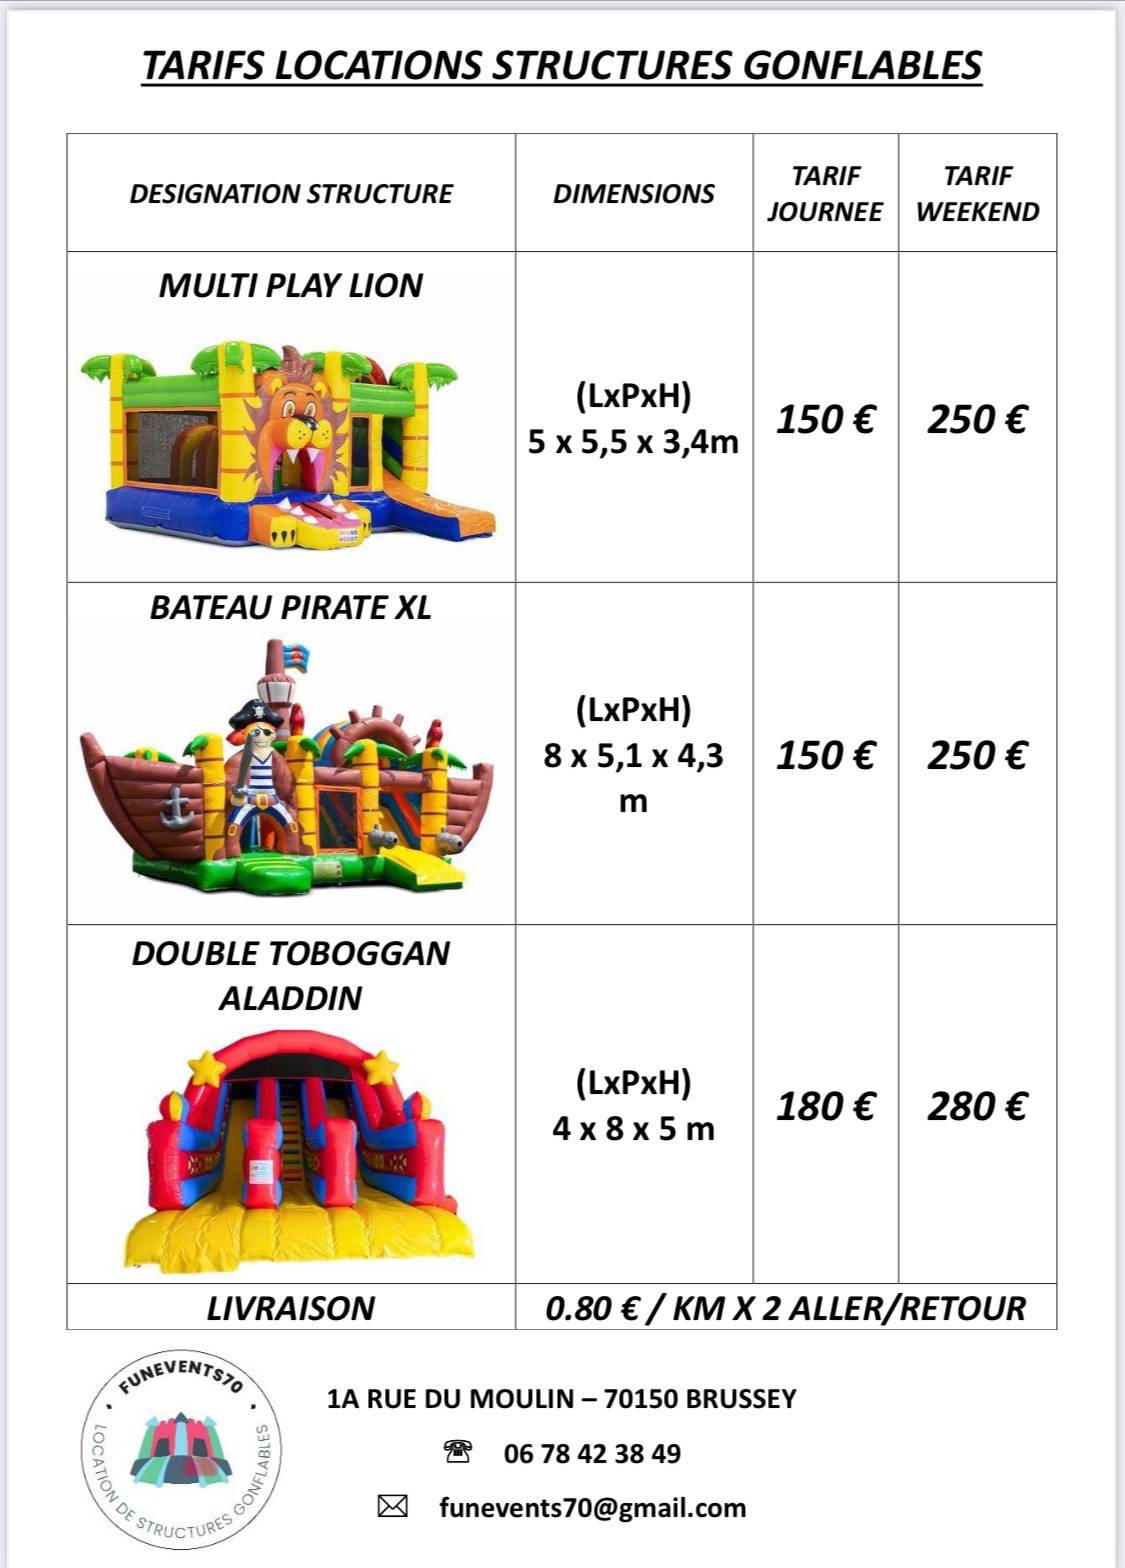 Structures gonflables Multiplay Lion 